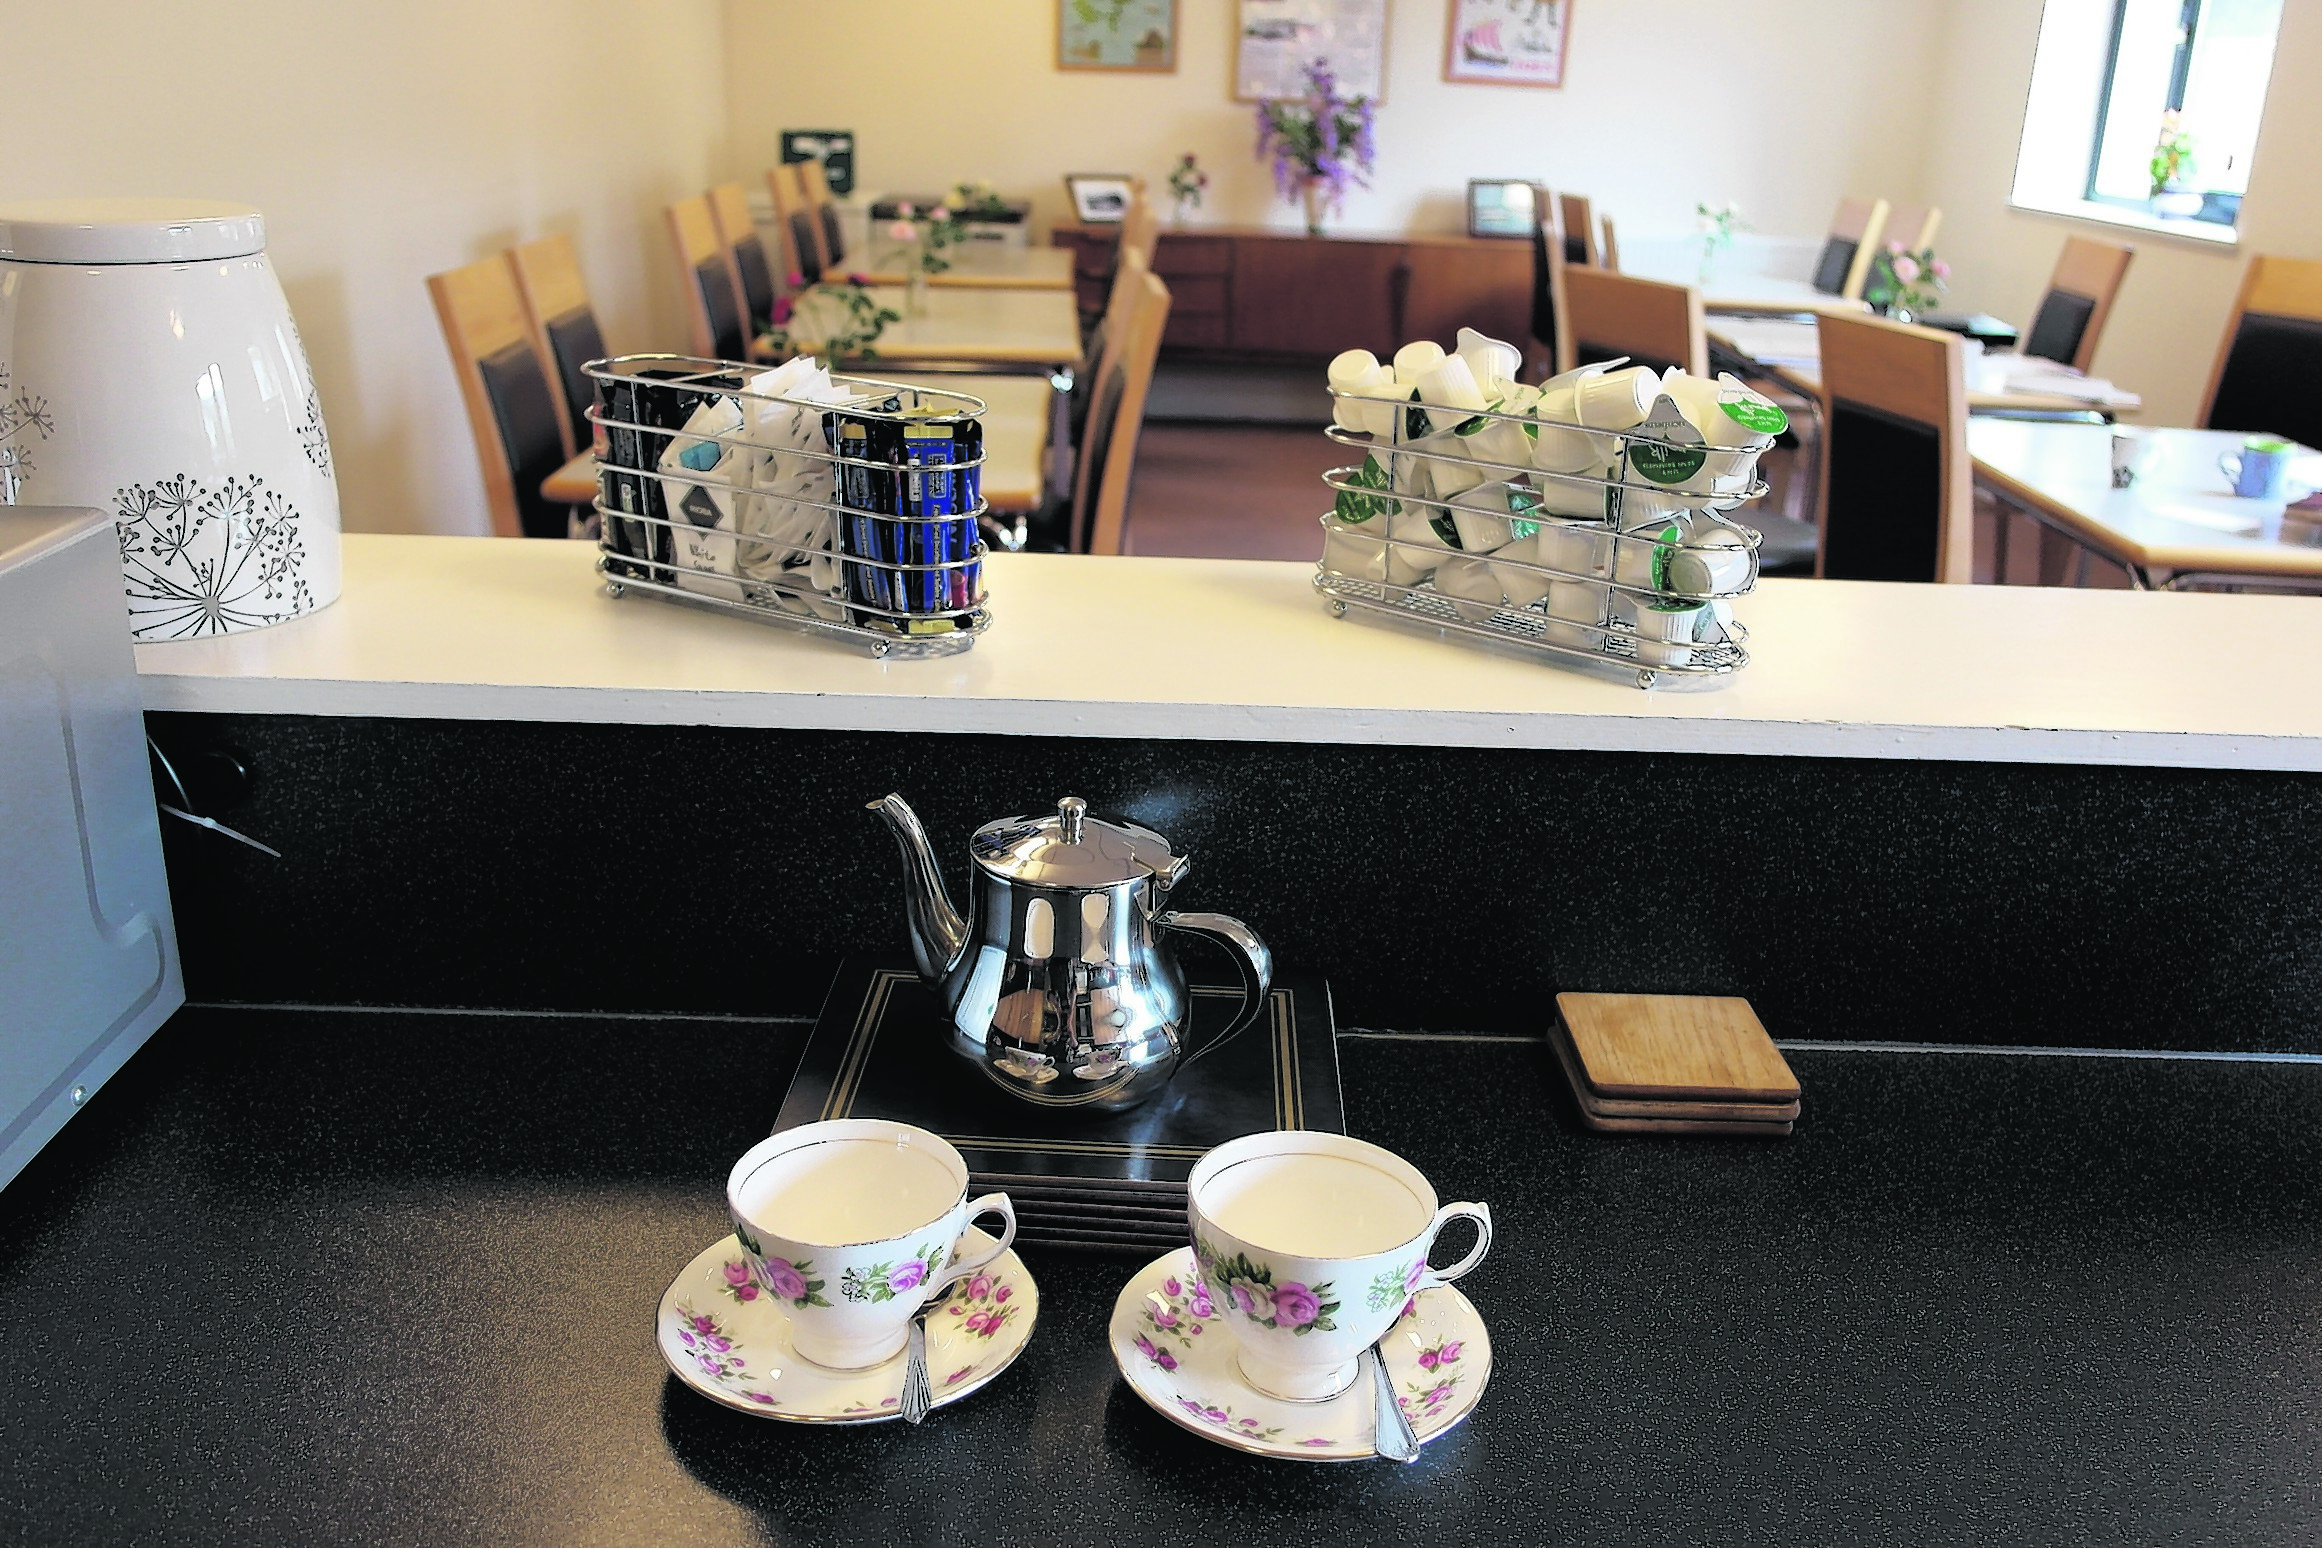 Facilities and comfort at the Red Cross Aberdeen guest house